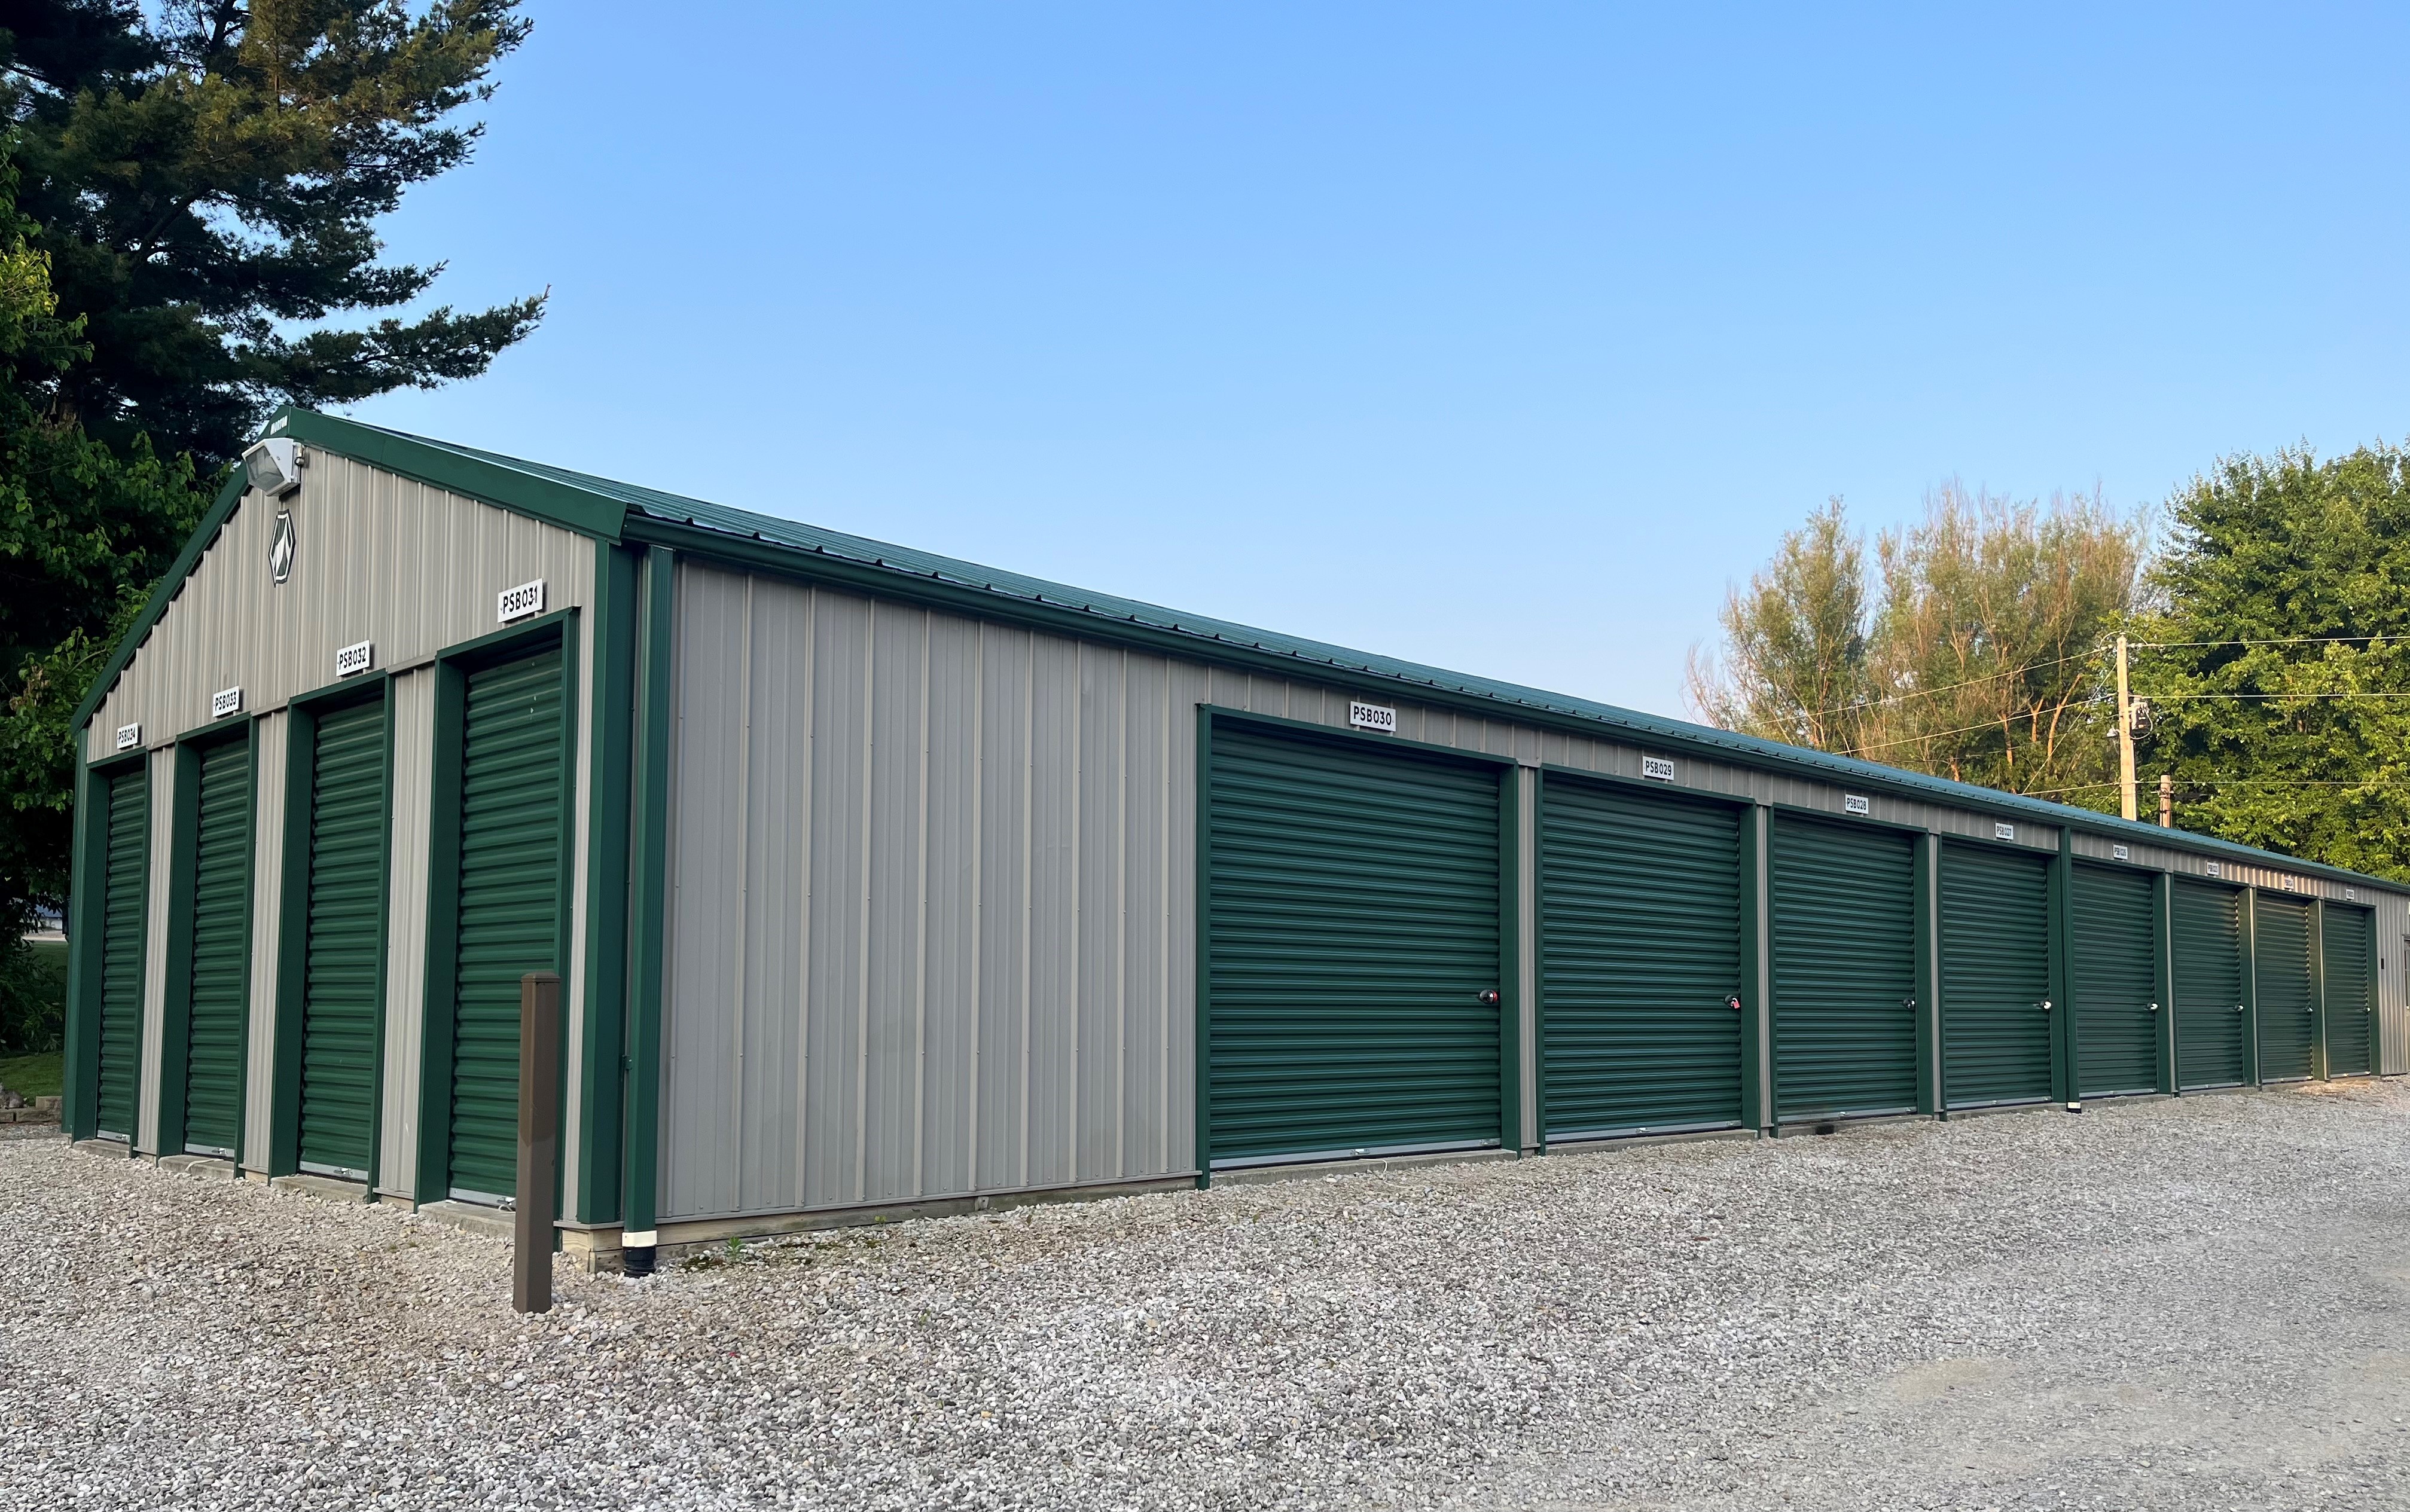 Birdseye facility with convenient drive-up storage, green doors, offering 24/7 access and easy online bill payment.